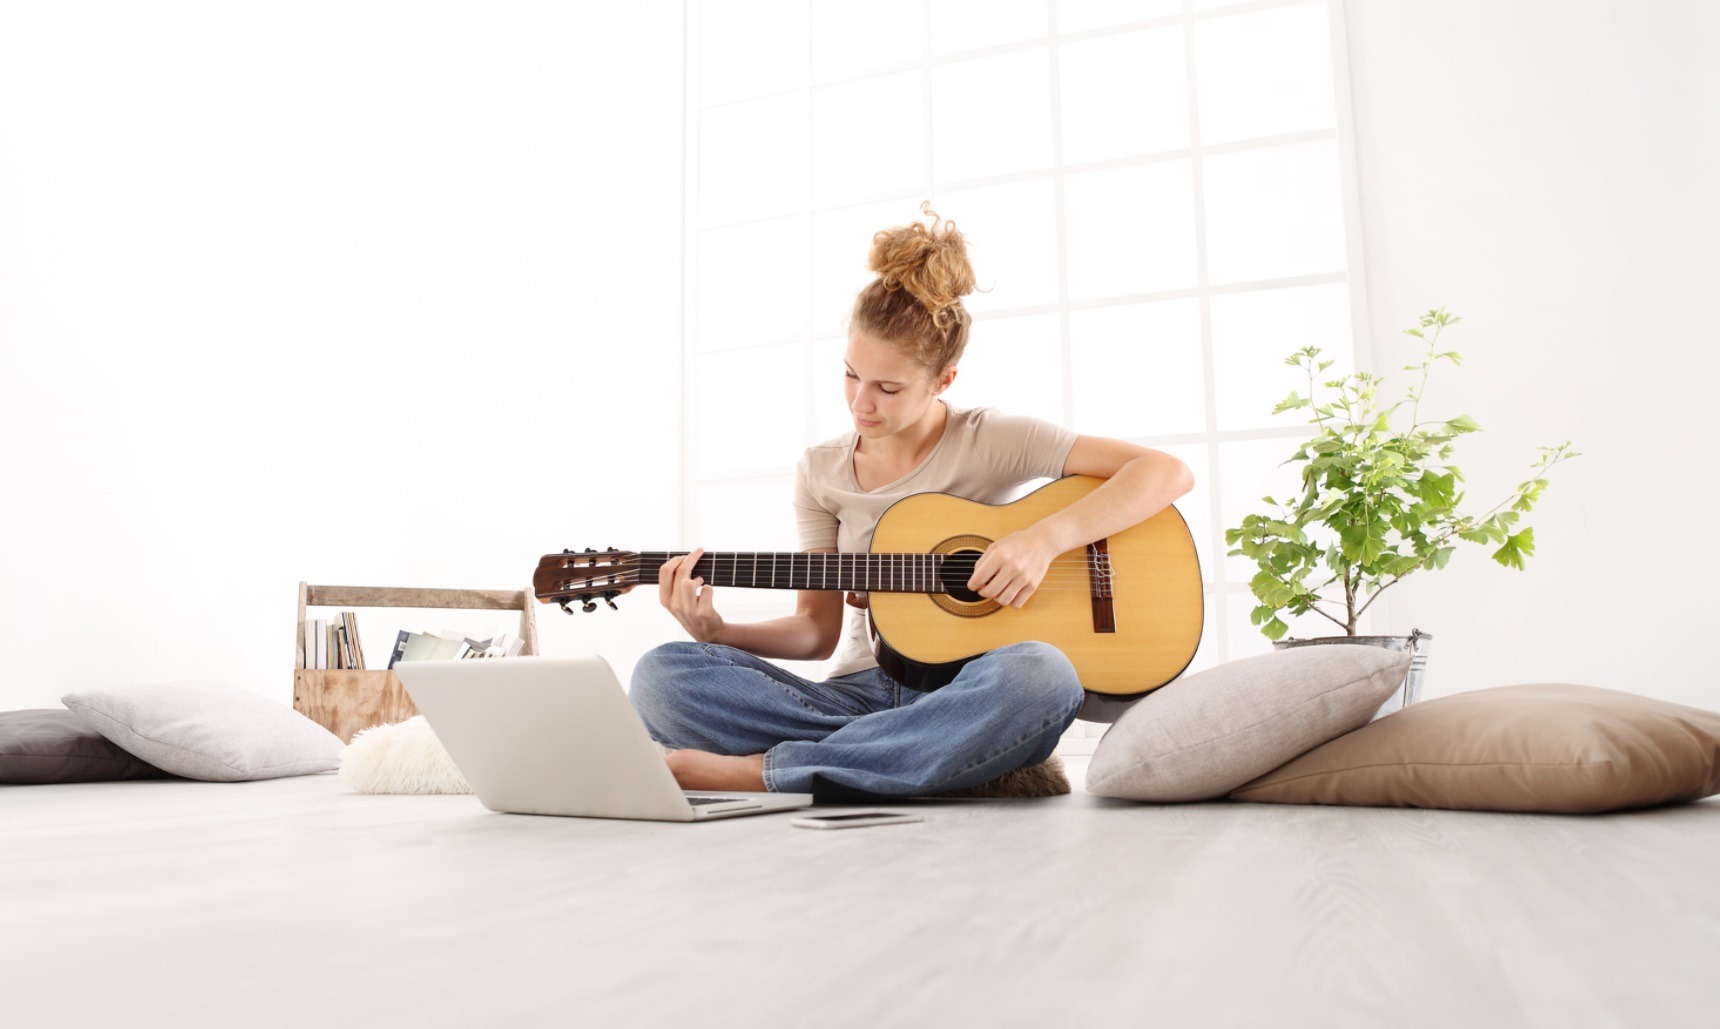 How to learn Music at Your Own Pace